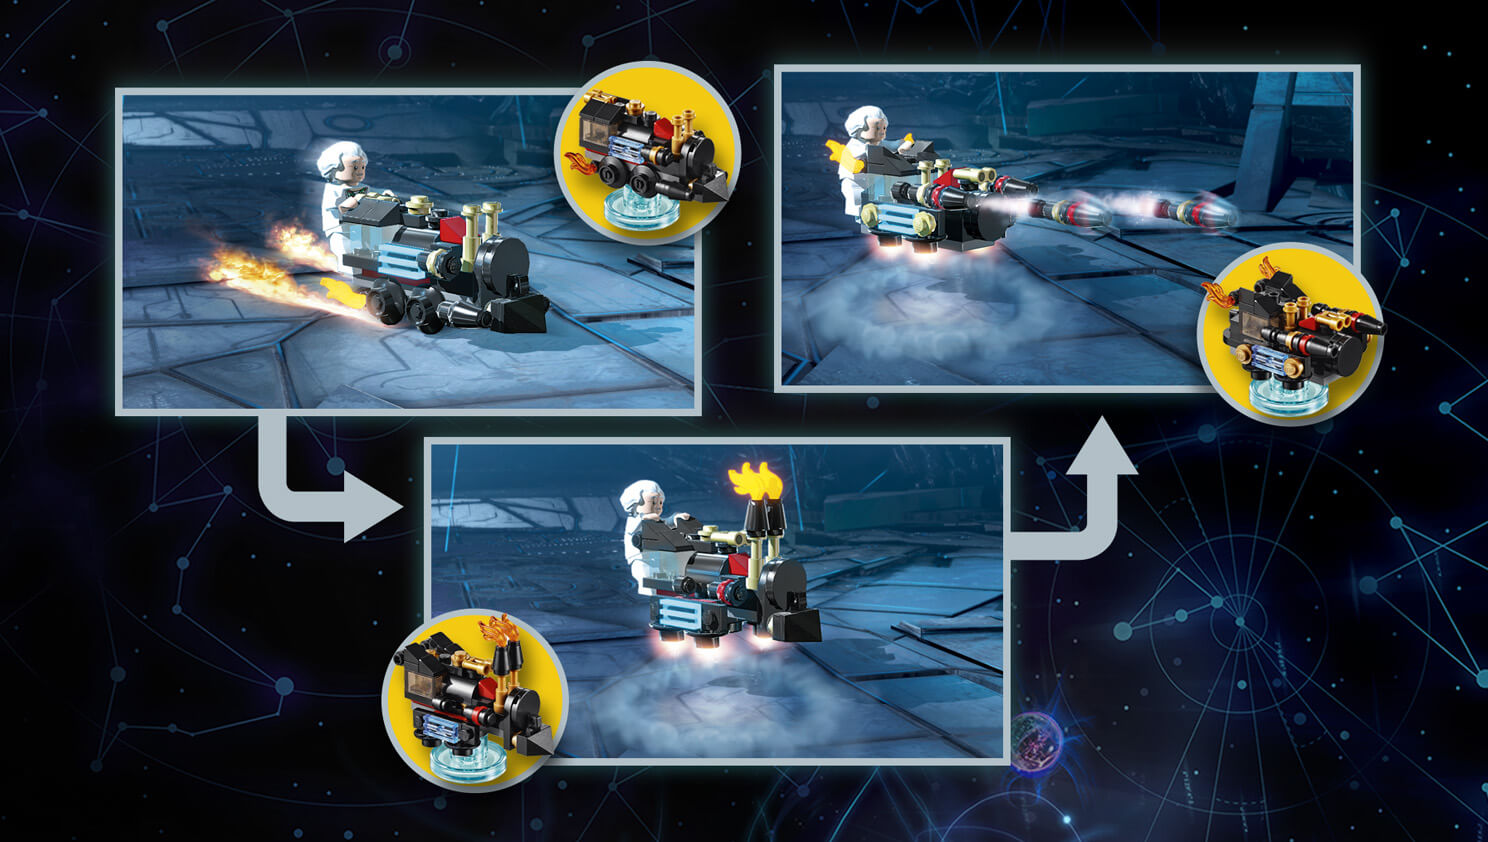 lego dimensions time travel